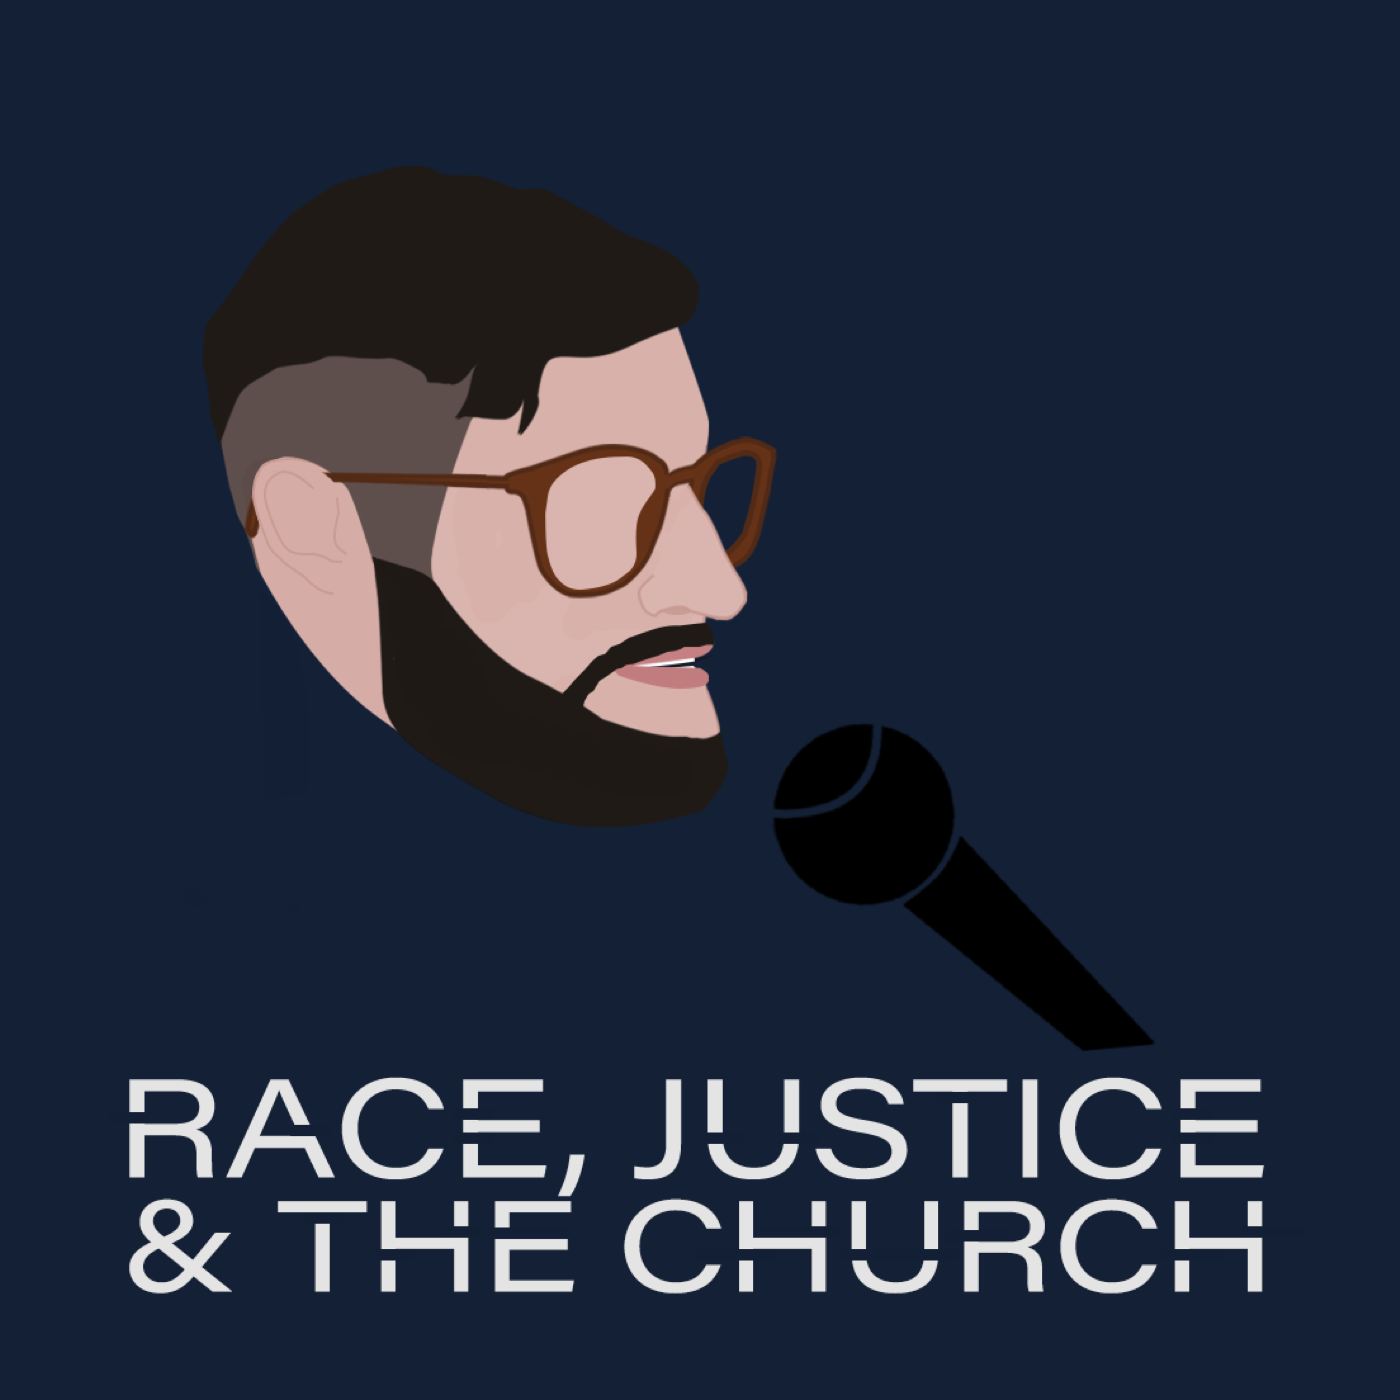 Race, Justice and the Church